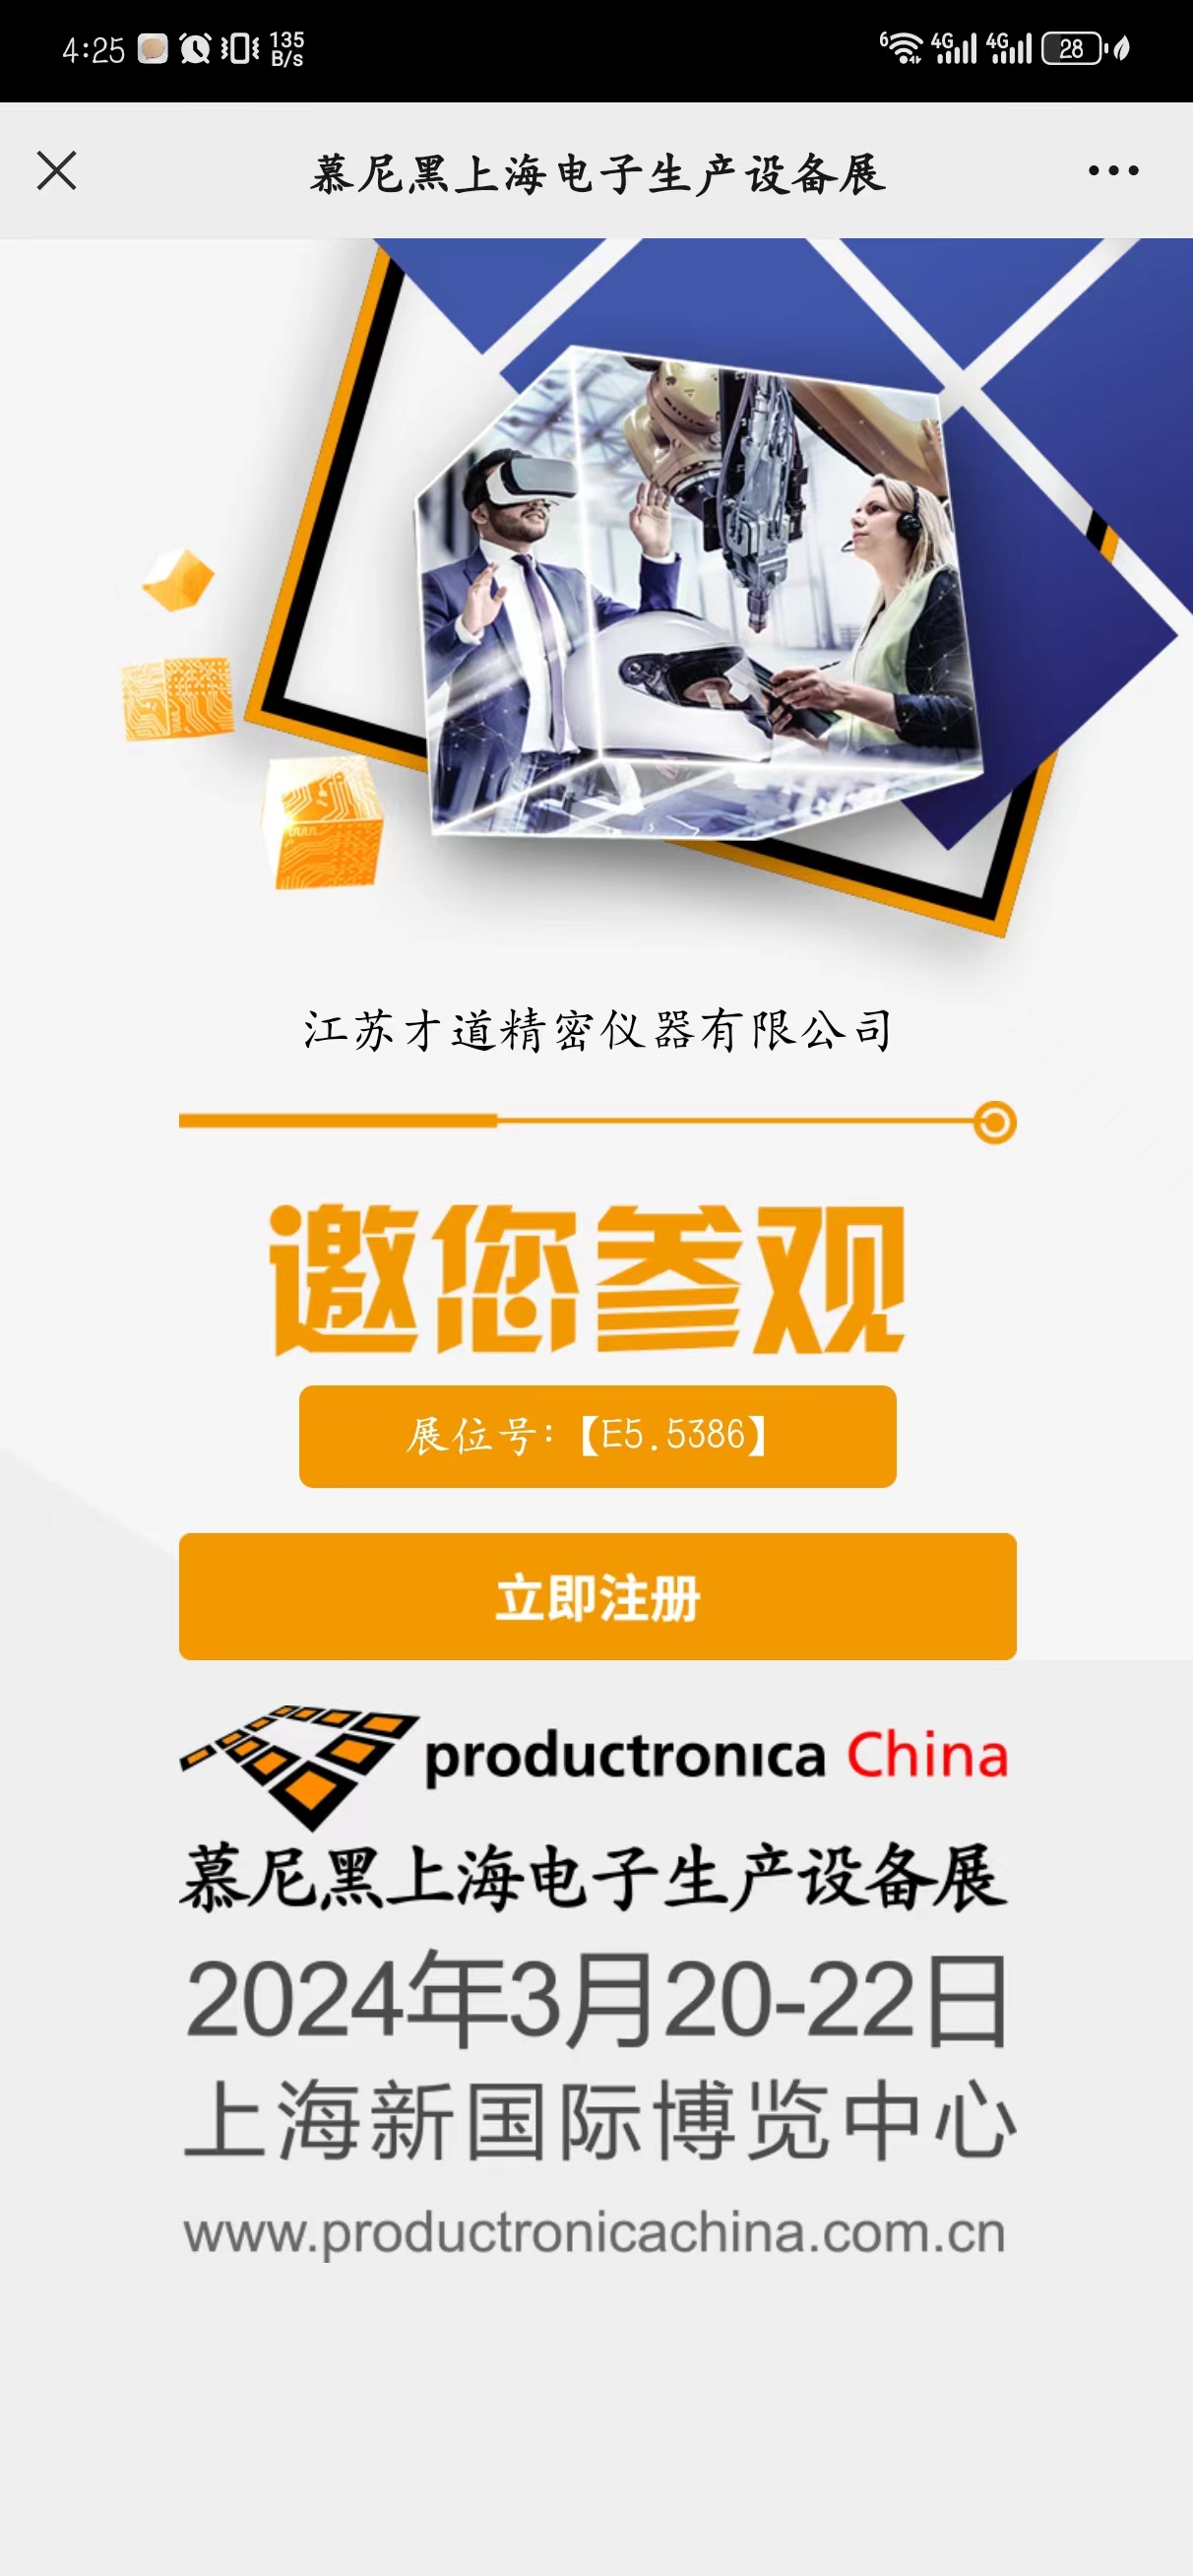 productronica China.jpg